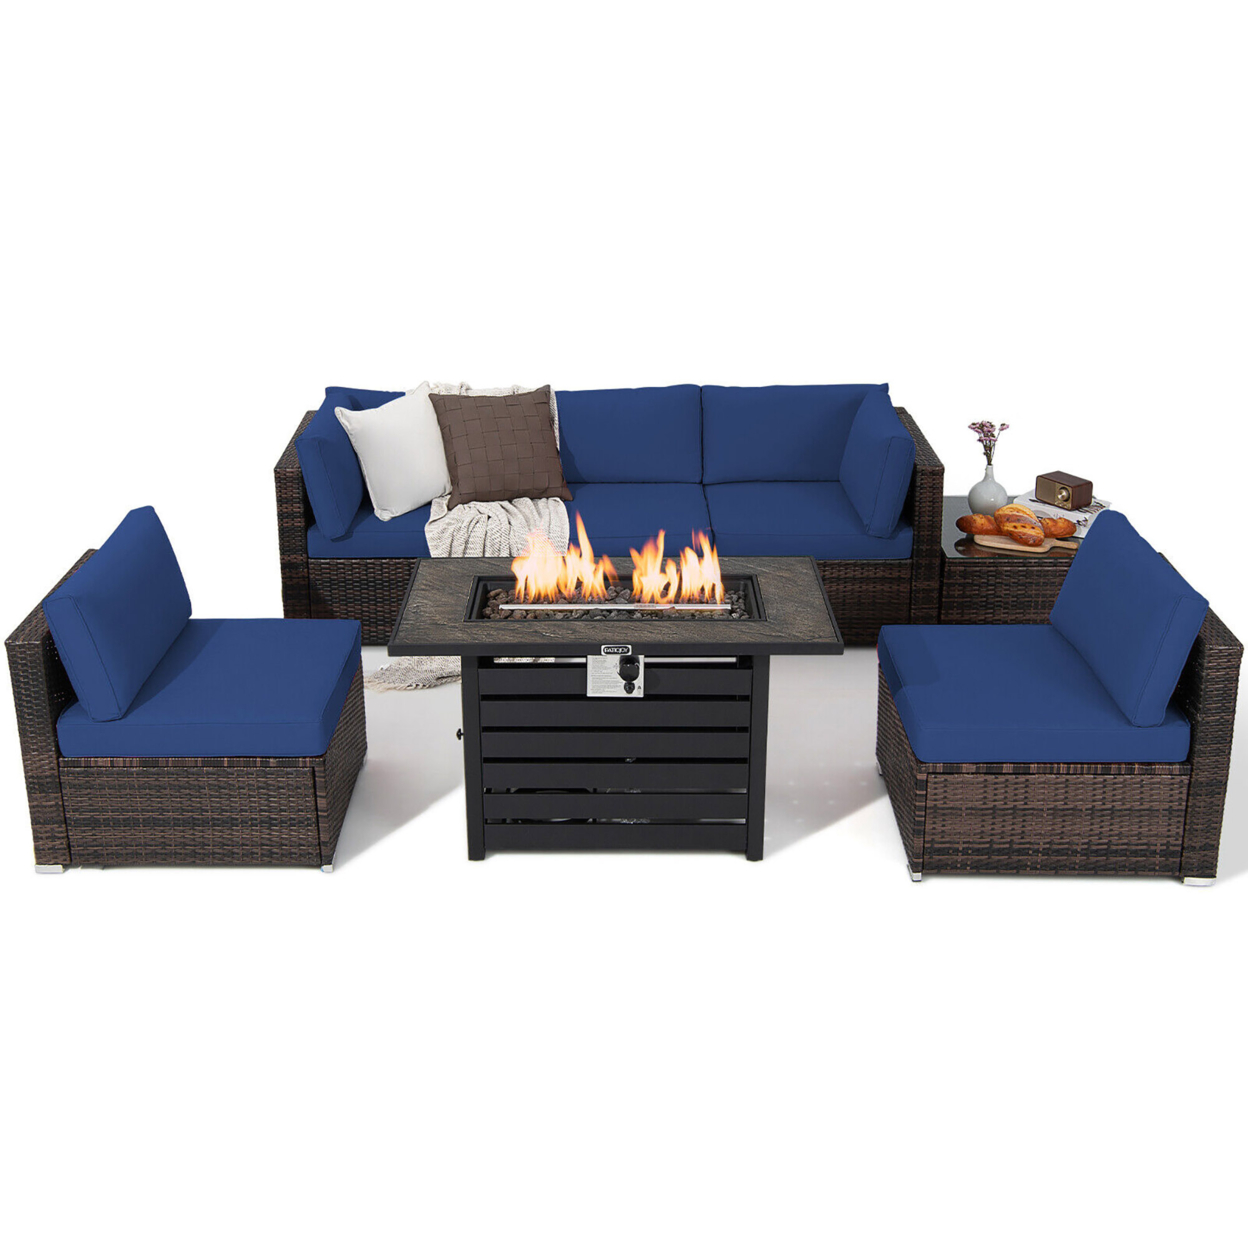 7PCS Patio Rattan Furniture Set 42'' Fire Pit Table W/ Cover Cushioned - Navy